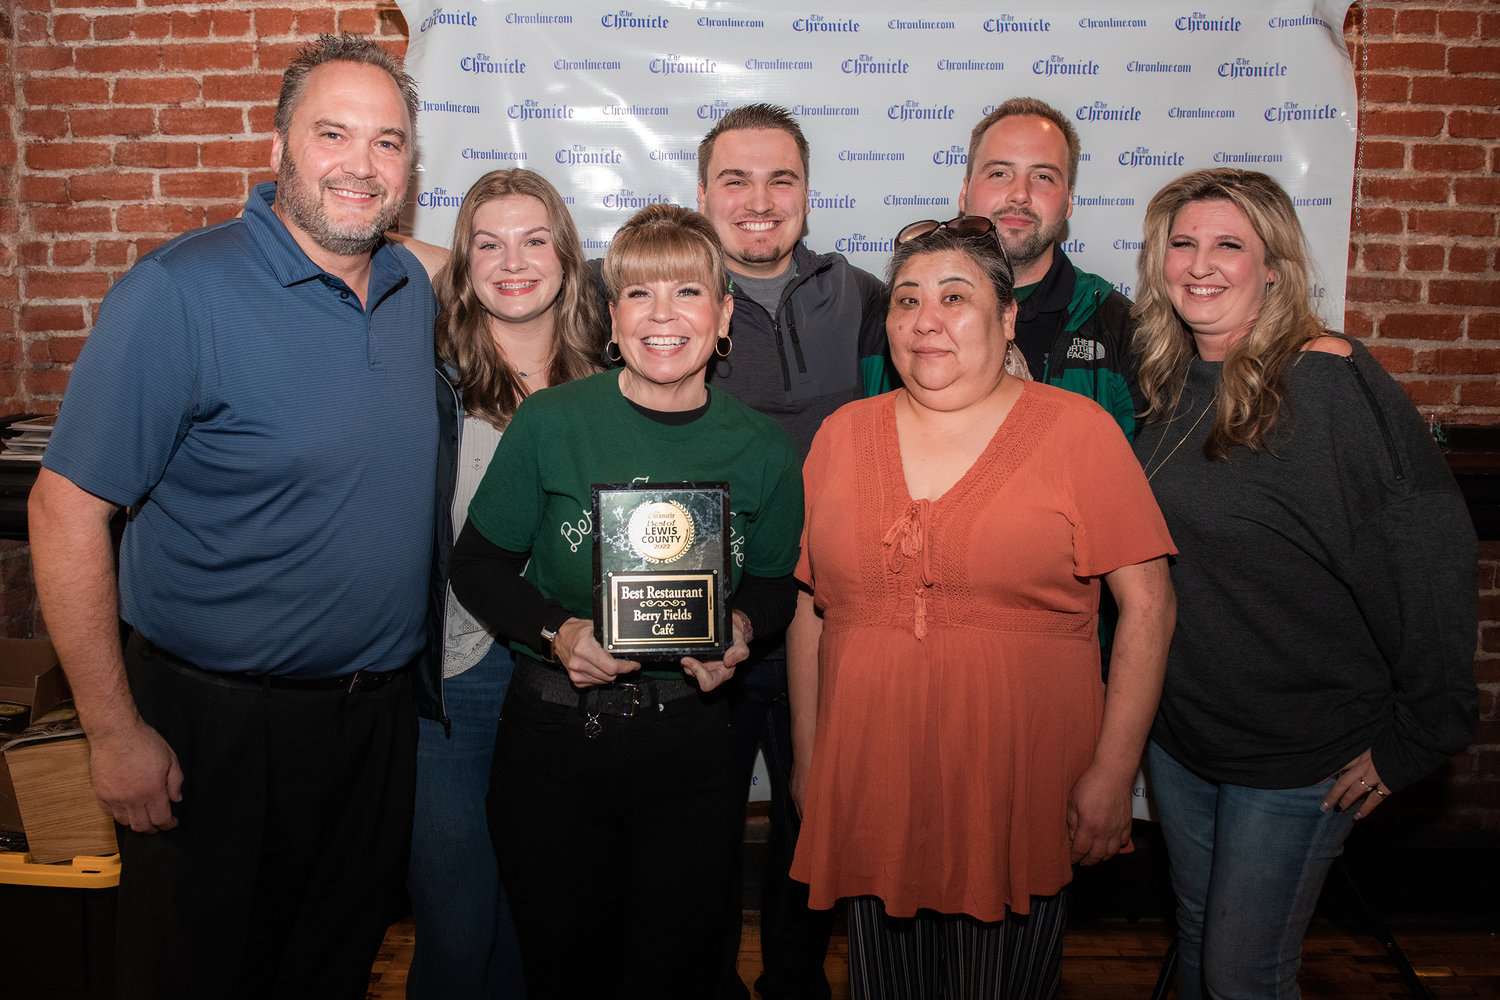 Berry Fields Cafe won “Best Restaurant,” with Cyndi Water named “Best Server” during the 2022 Best of Lewis County event hosted by The Chronicle at The Juice Box Thursday evening in Centralia.